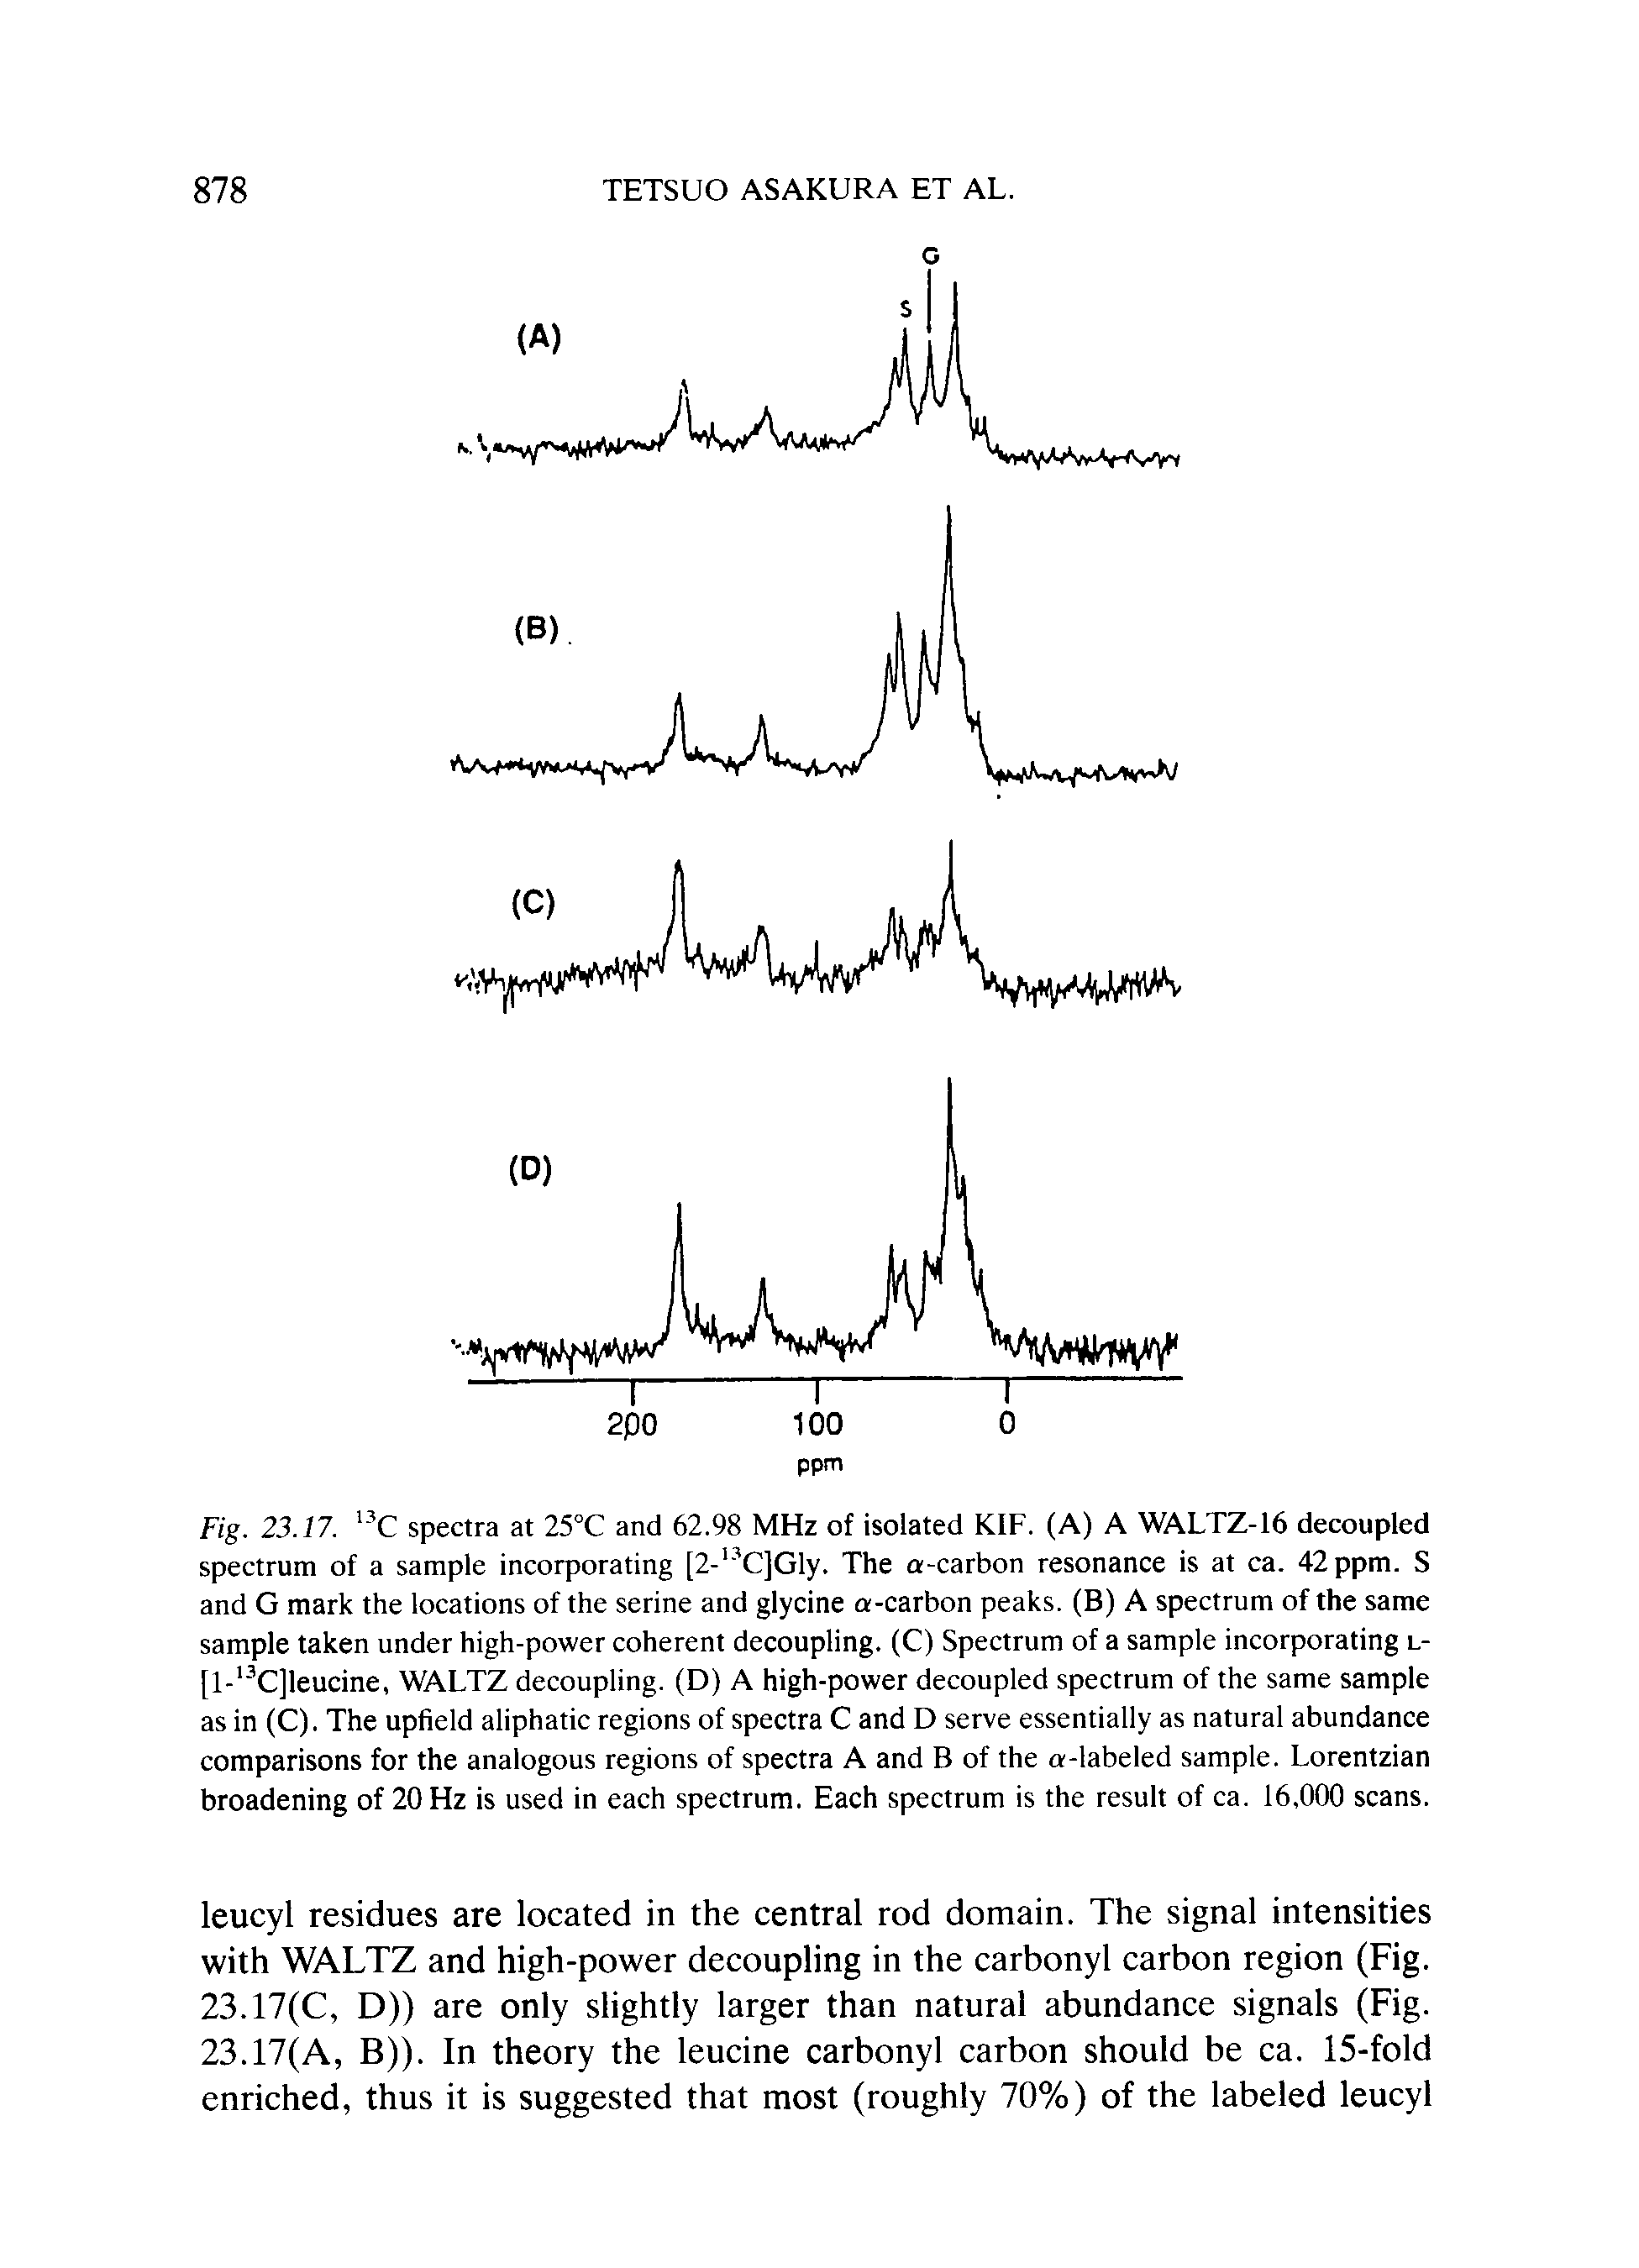 Fig. 23.17. C spectra at 25°C and 62.98 MHz of isolated KIF. (A) A WALTZ-16 decoupled spectrum of a sample incorporating [2- C]Gly. The a-carbon resonance is at ca. 42 ppm. S and G mark the locations of the serine and glycine a-carbon peaks. (B) A spectrum of the same sample taken under high-power coherent decoupling. (C) Spectrum of a sample incorporating l-[l- C]leucine, WALTZ decoupling. (D) A high-power decoupled spectrum of the same sample as in (C). The upheld aliphatic regions of spectra C and D serve essentially as natural abundance comparisons for the analogous regions of spectra A and B of the a-labeled sample. Lorentzian broadening of 20 Hz is used in each spectrum. Each spectrum is the result of ca. 16,000 scans.